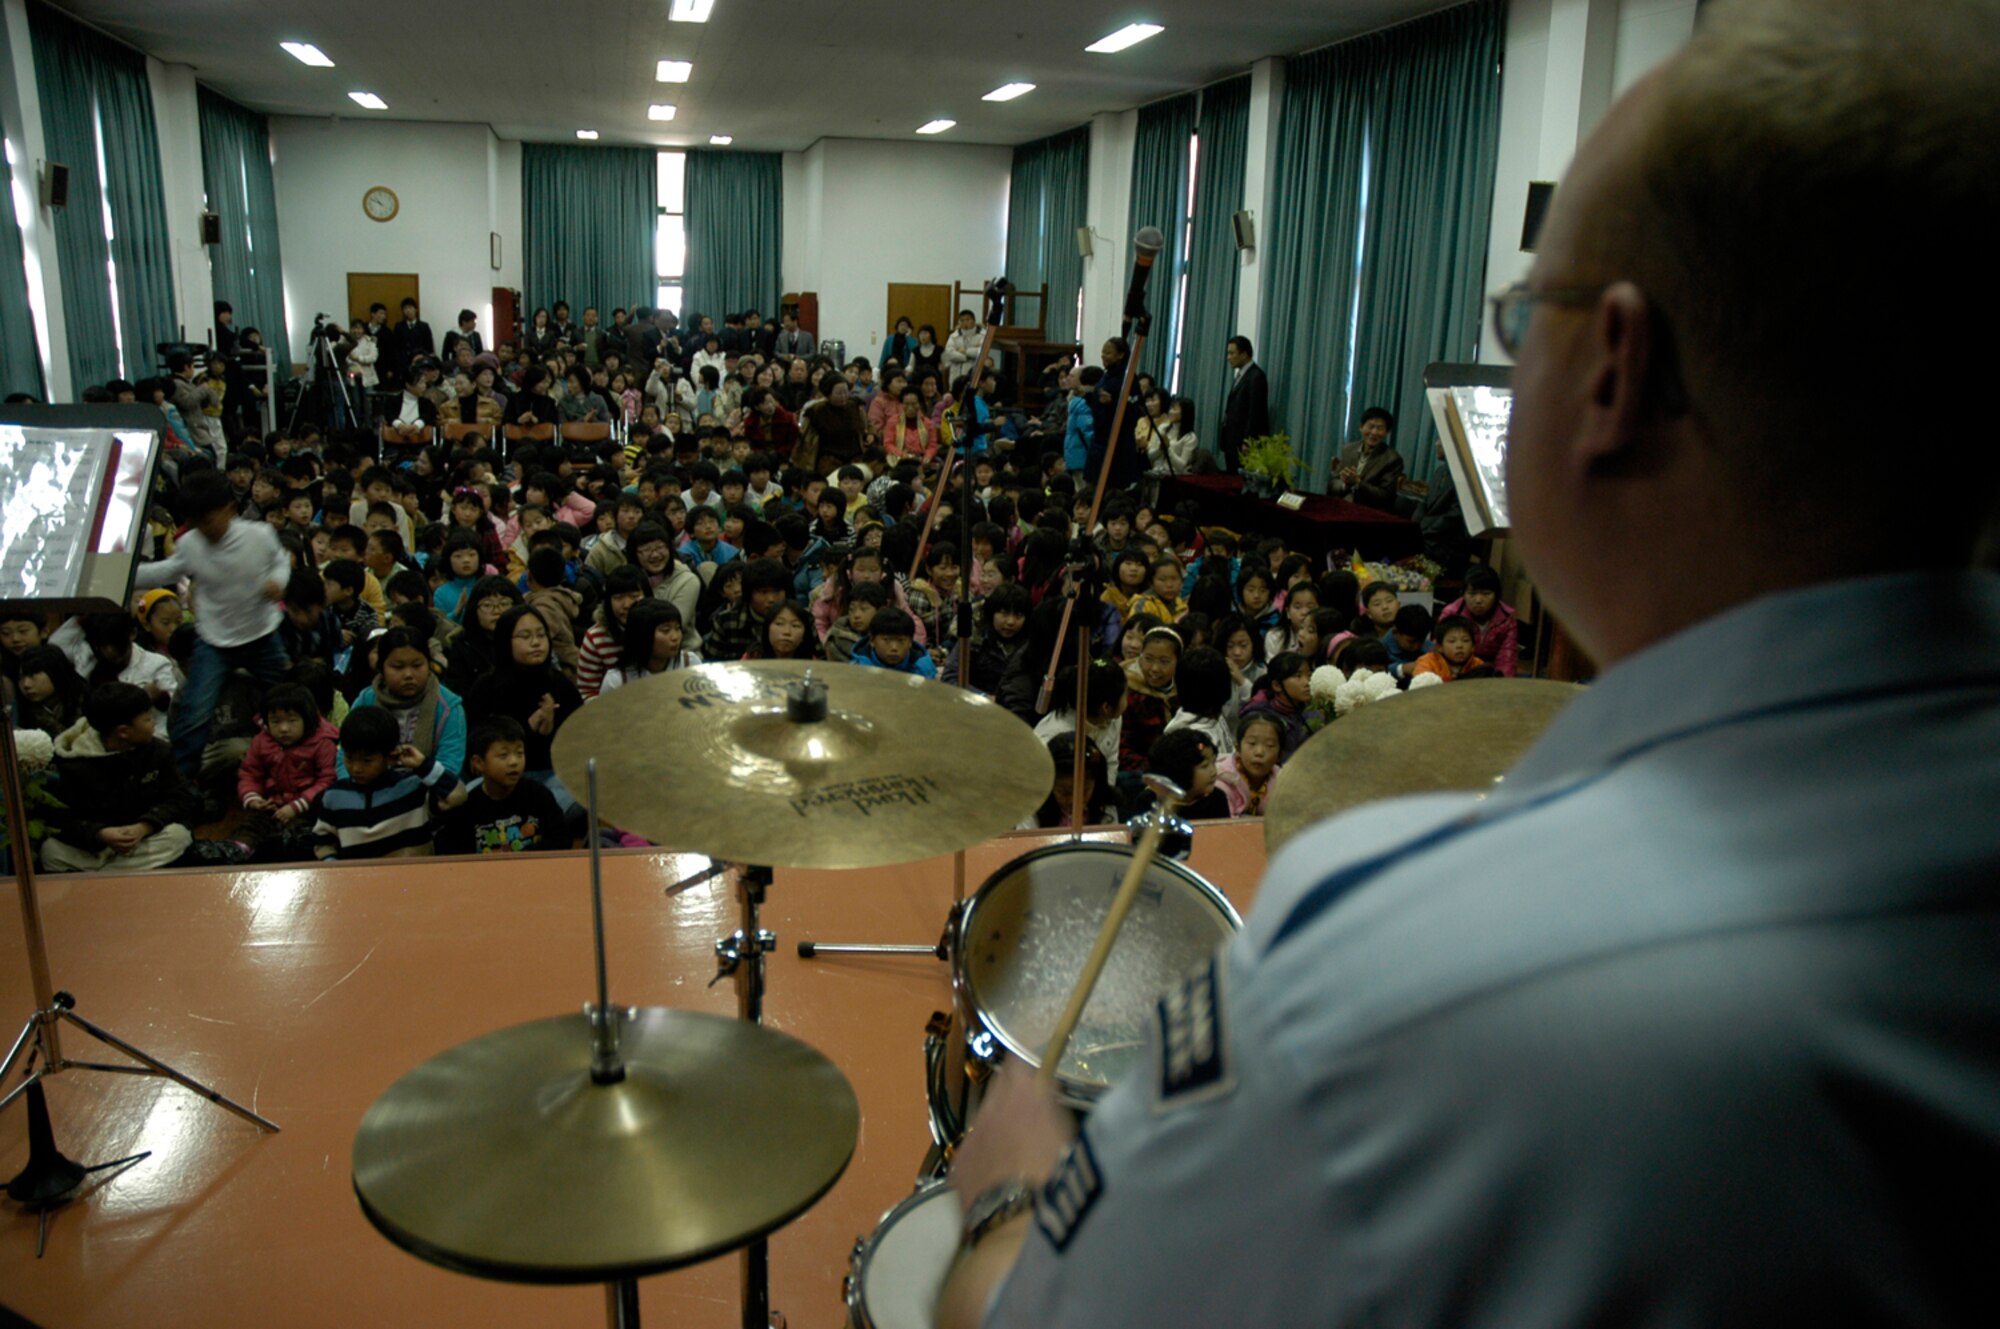 KUNSAN AIR BASE, South Korea -- Air Force Band of the Pacific drummer Staff Sgt. Darren Raybourne performs for students at Na Po Elementary School during the groups performance at the local Gunsan City School Dec. 5. The Elmendorf Air Force Base, Alaska based band performed for more than 300 students, parents and teachers as part of their civic outreach and the base's Good Neighbor Program. (U.S. Air Force Photo/Master Sgt. Sean P. Houlihan)